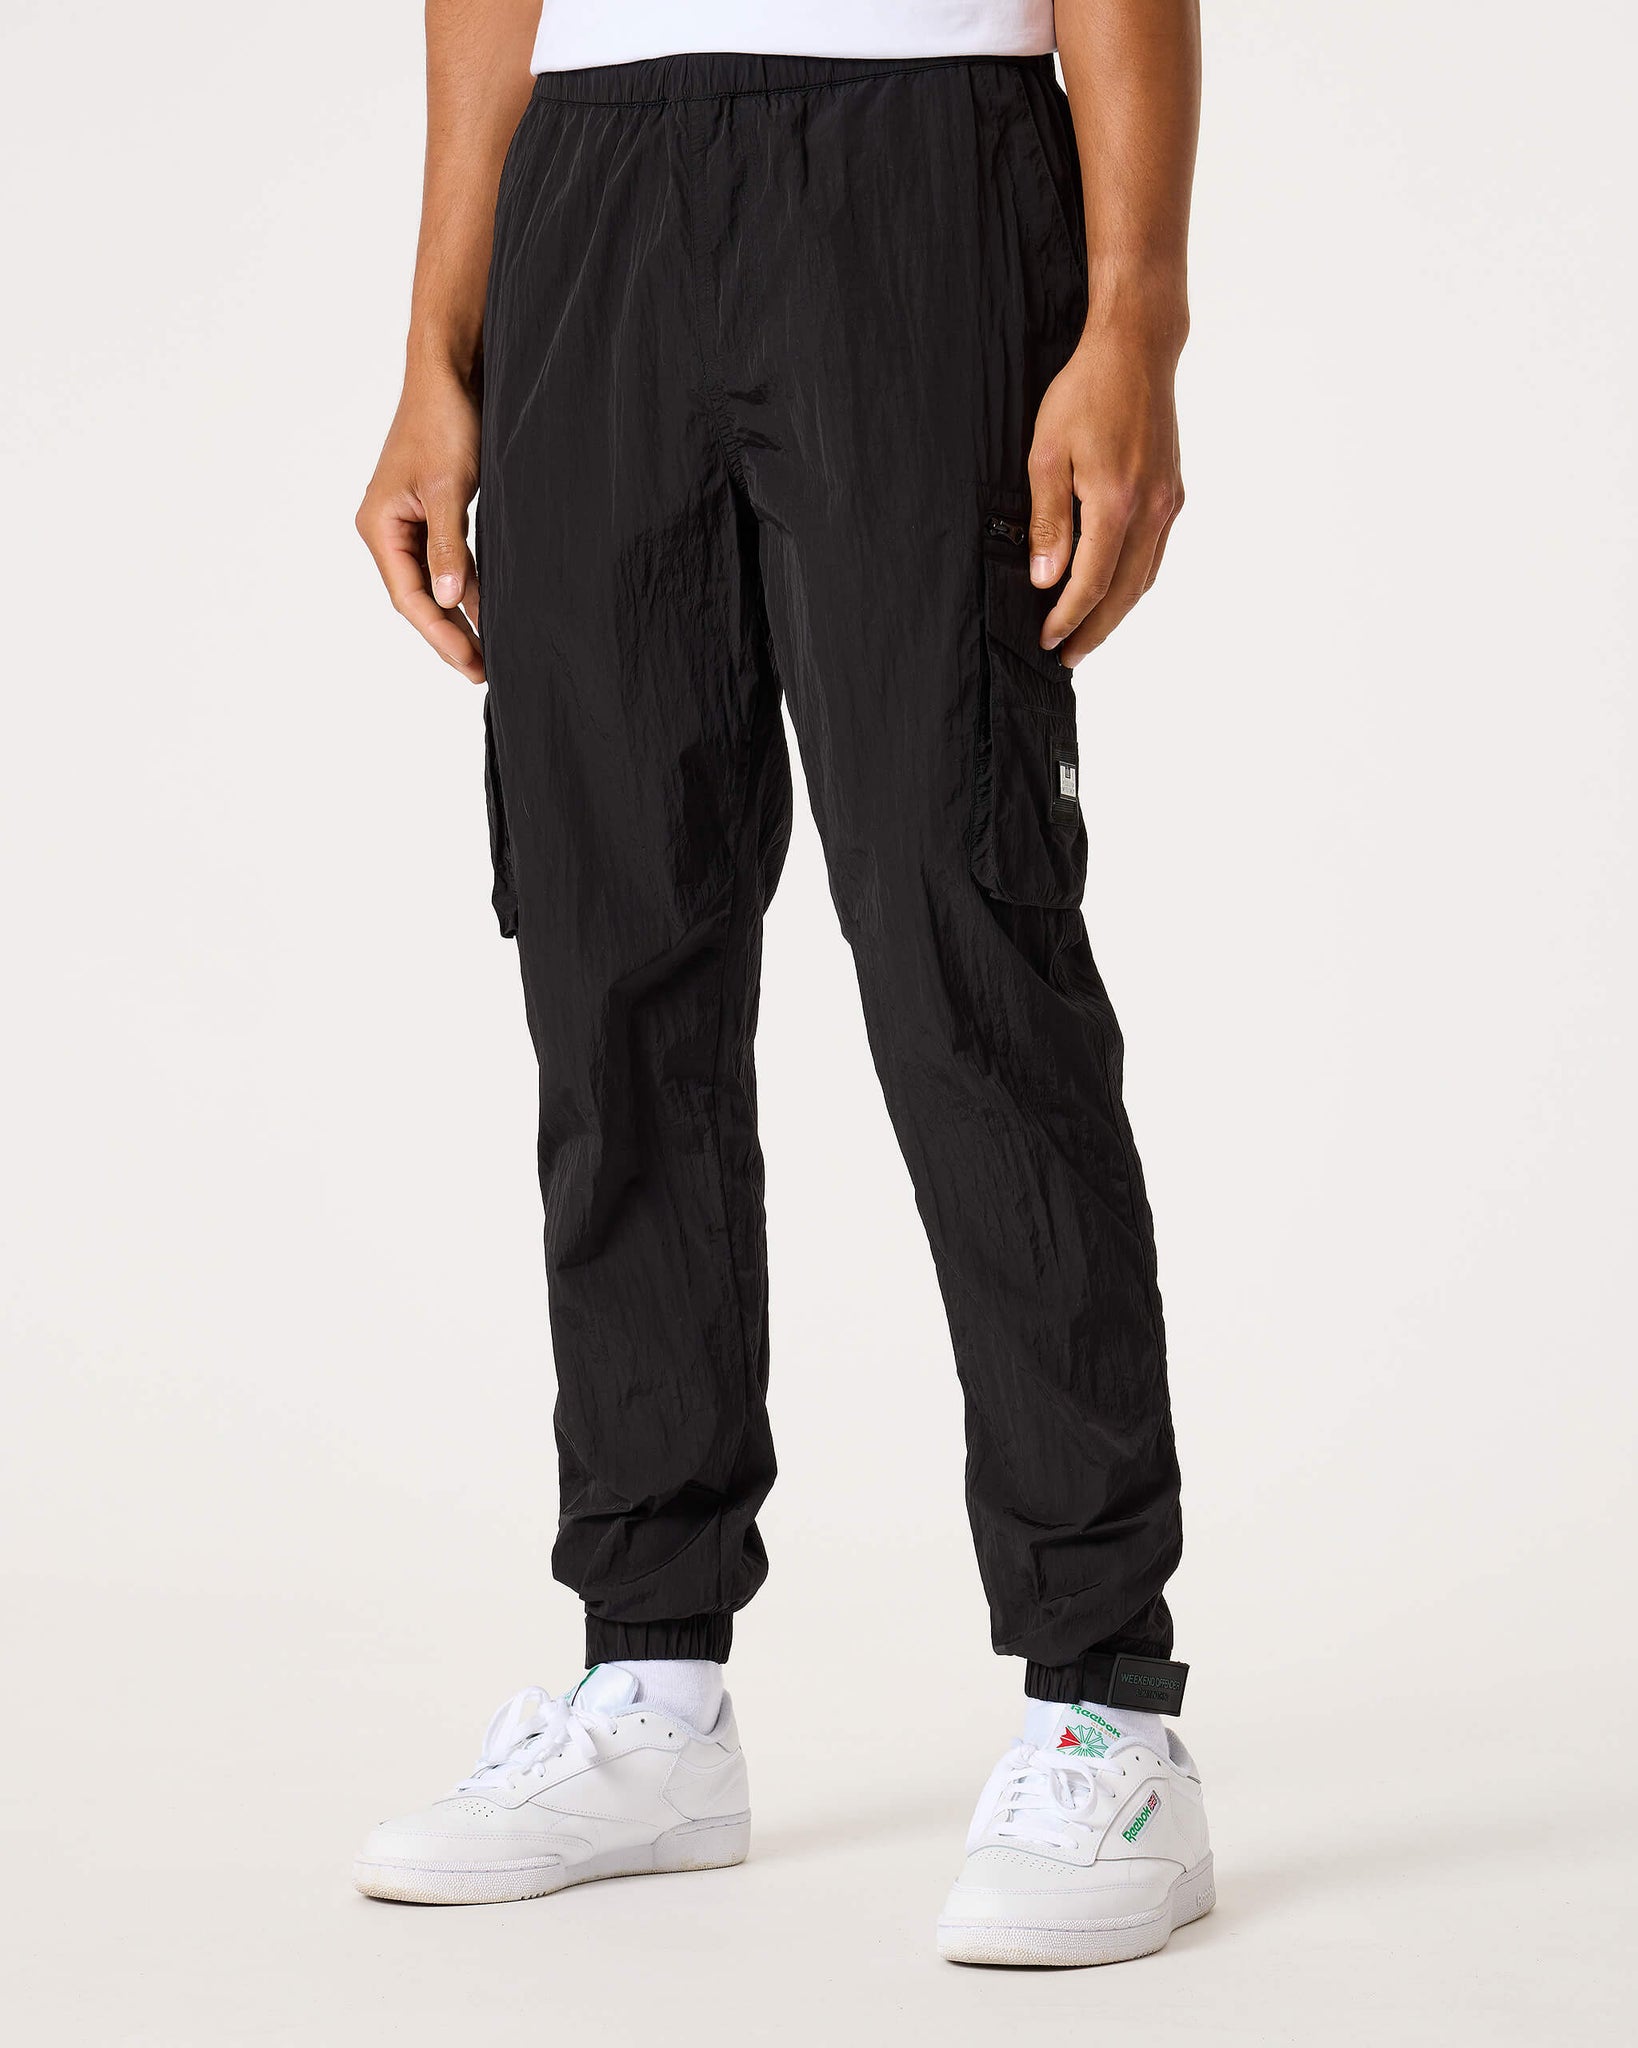 Arvind Sport  adidas popper pants mens outfit  adidas Sportswear Shoes   Clothes in Unique Offers